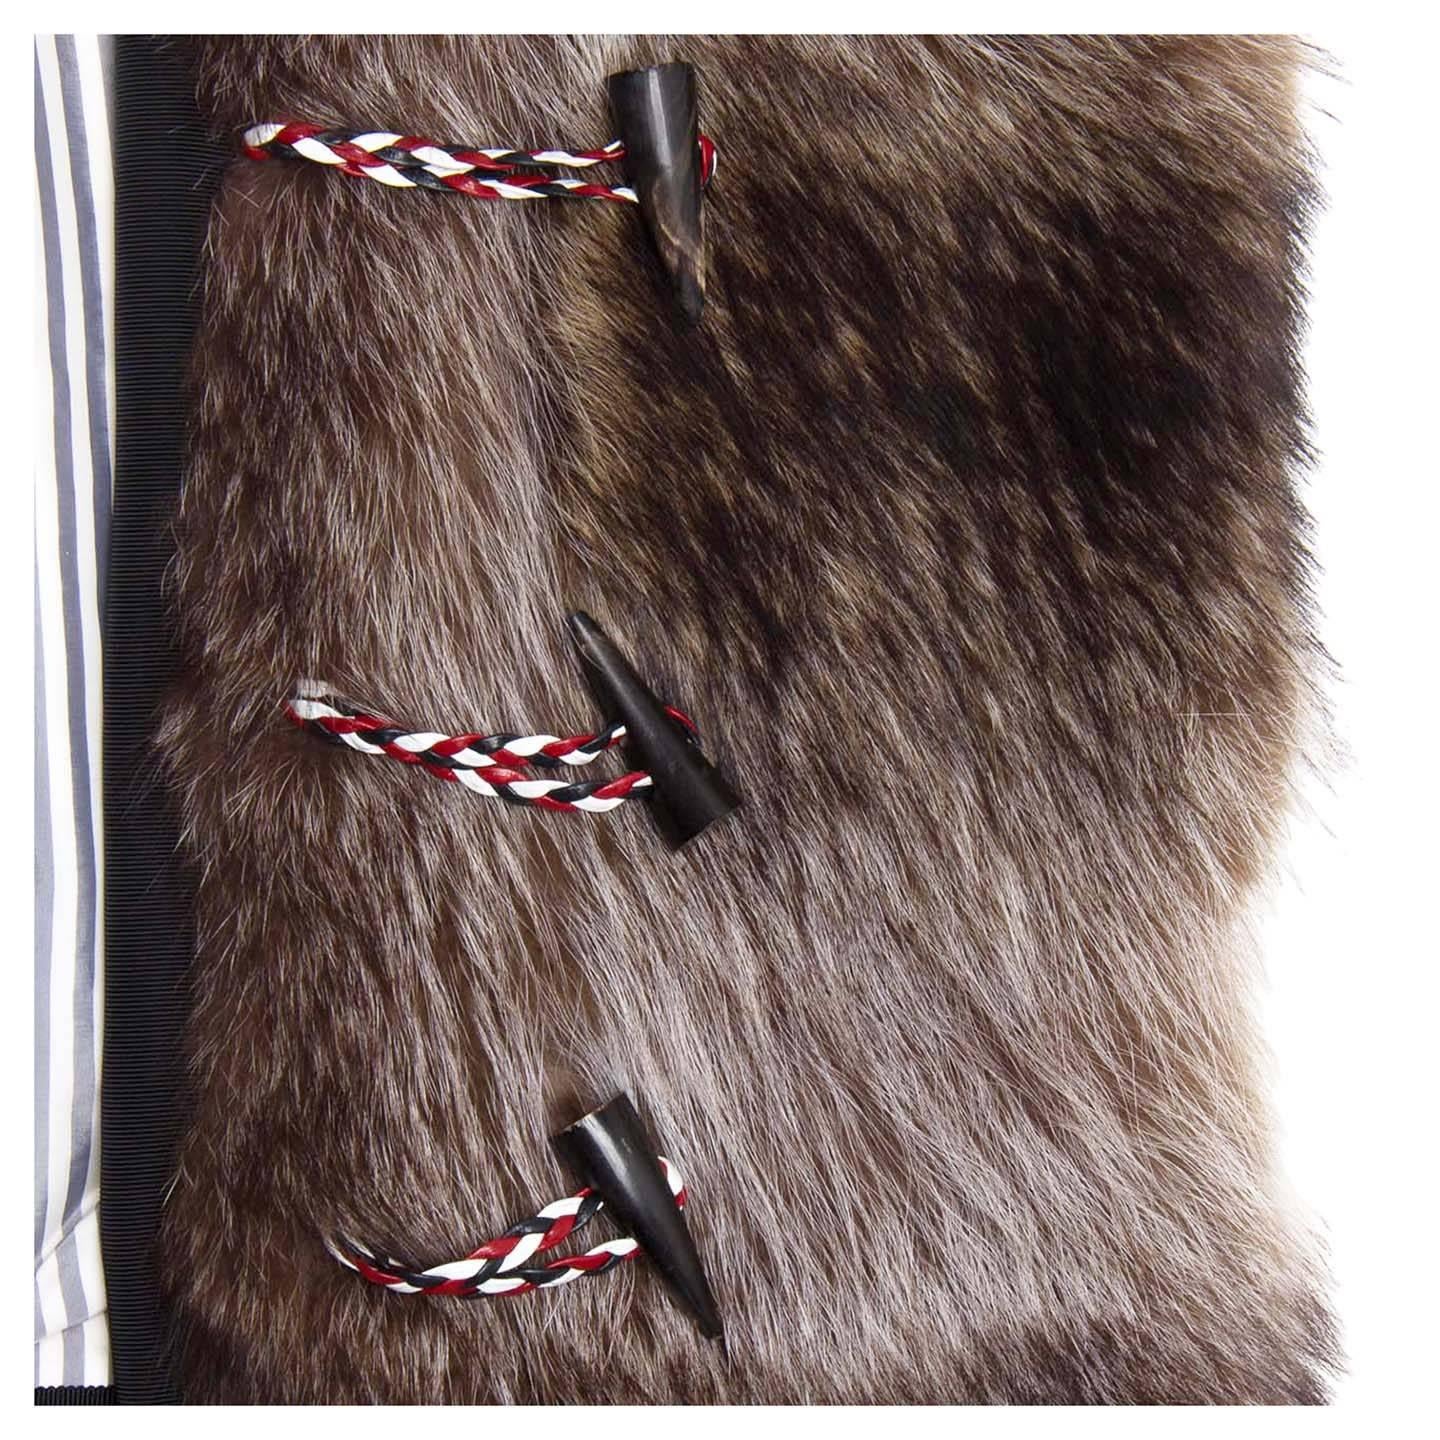 Thom Browne Raccoon Fur Vest In Excellent Condition For Sale In Brooklyn, NY